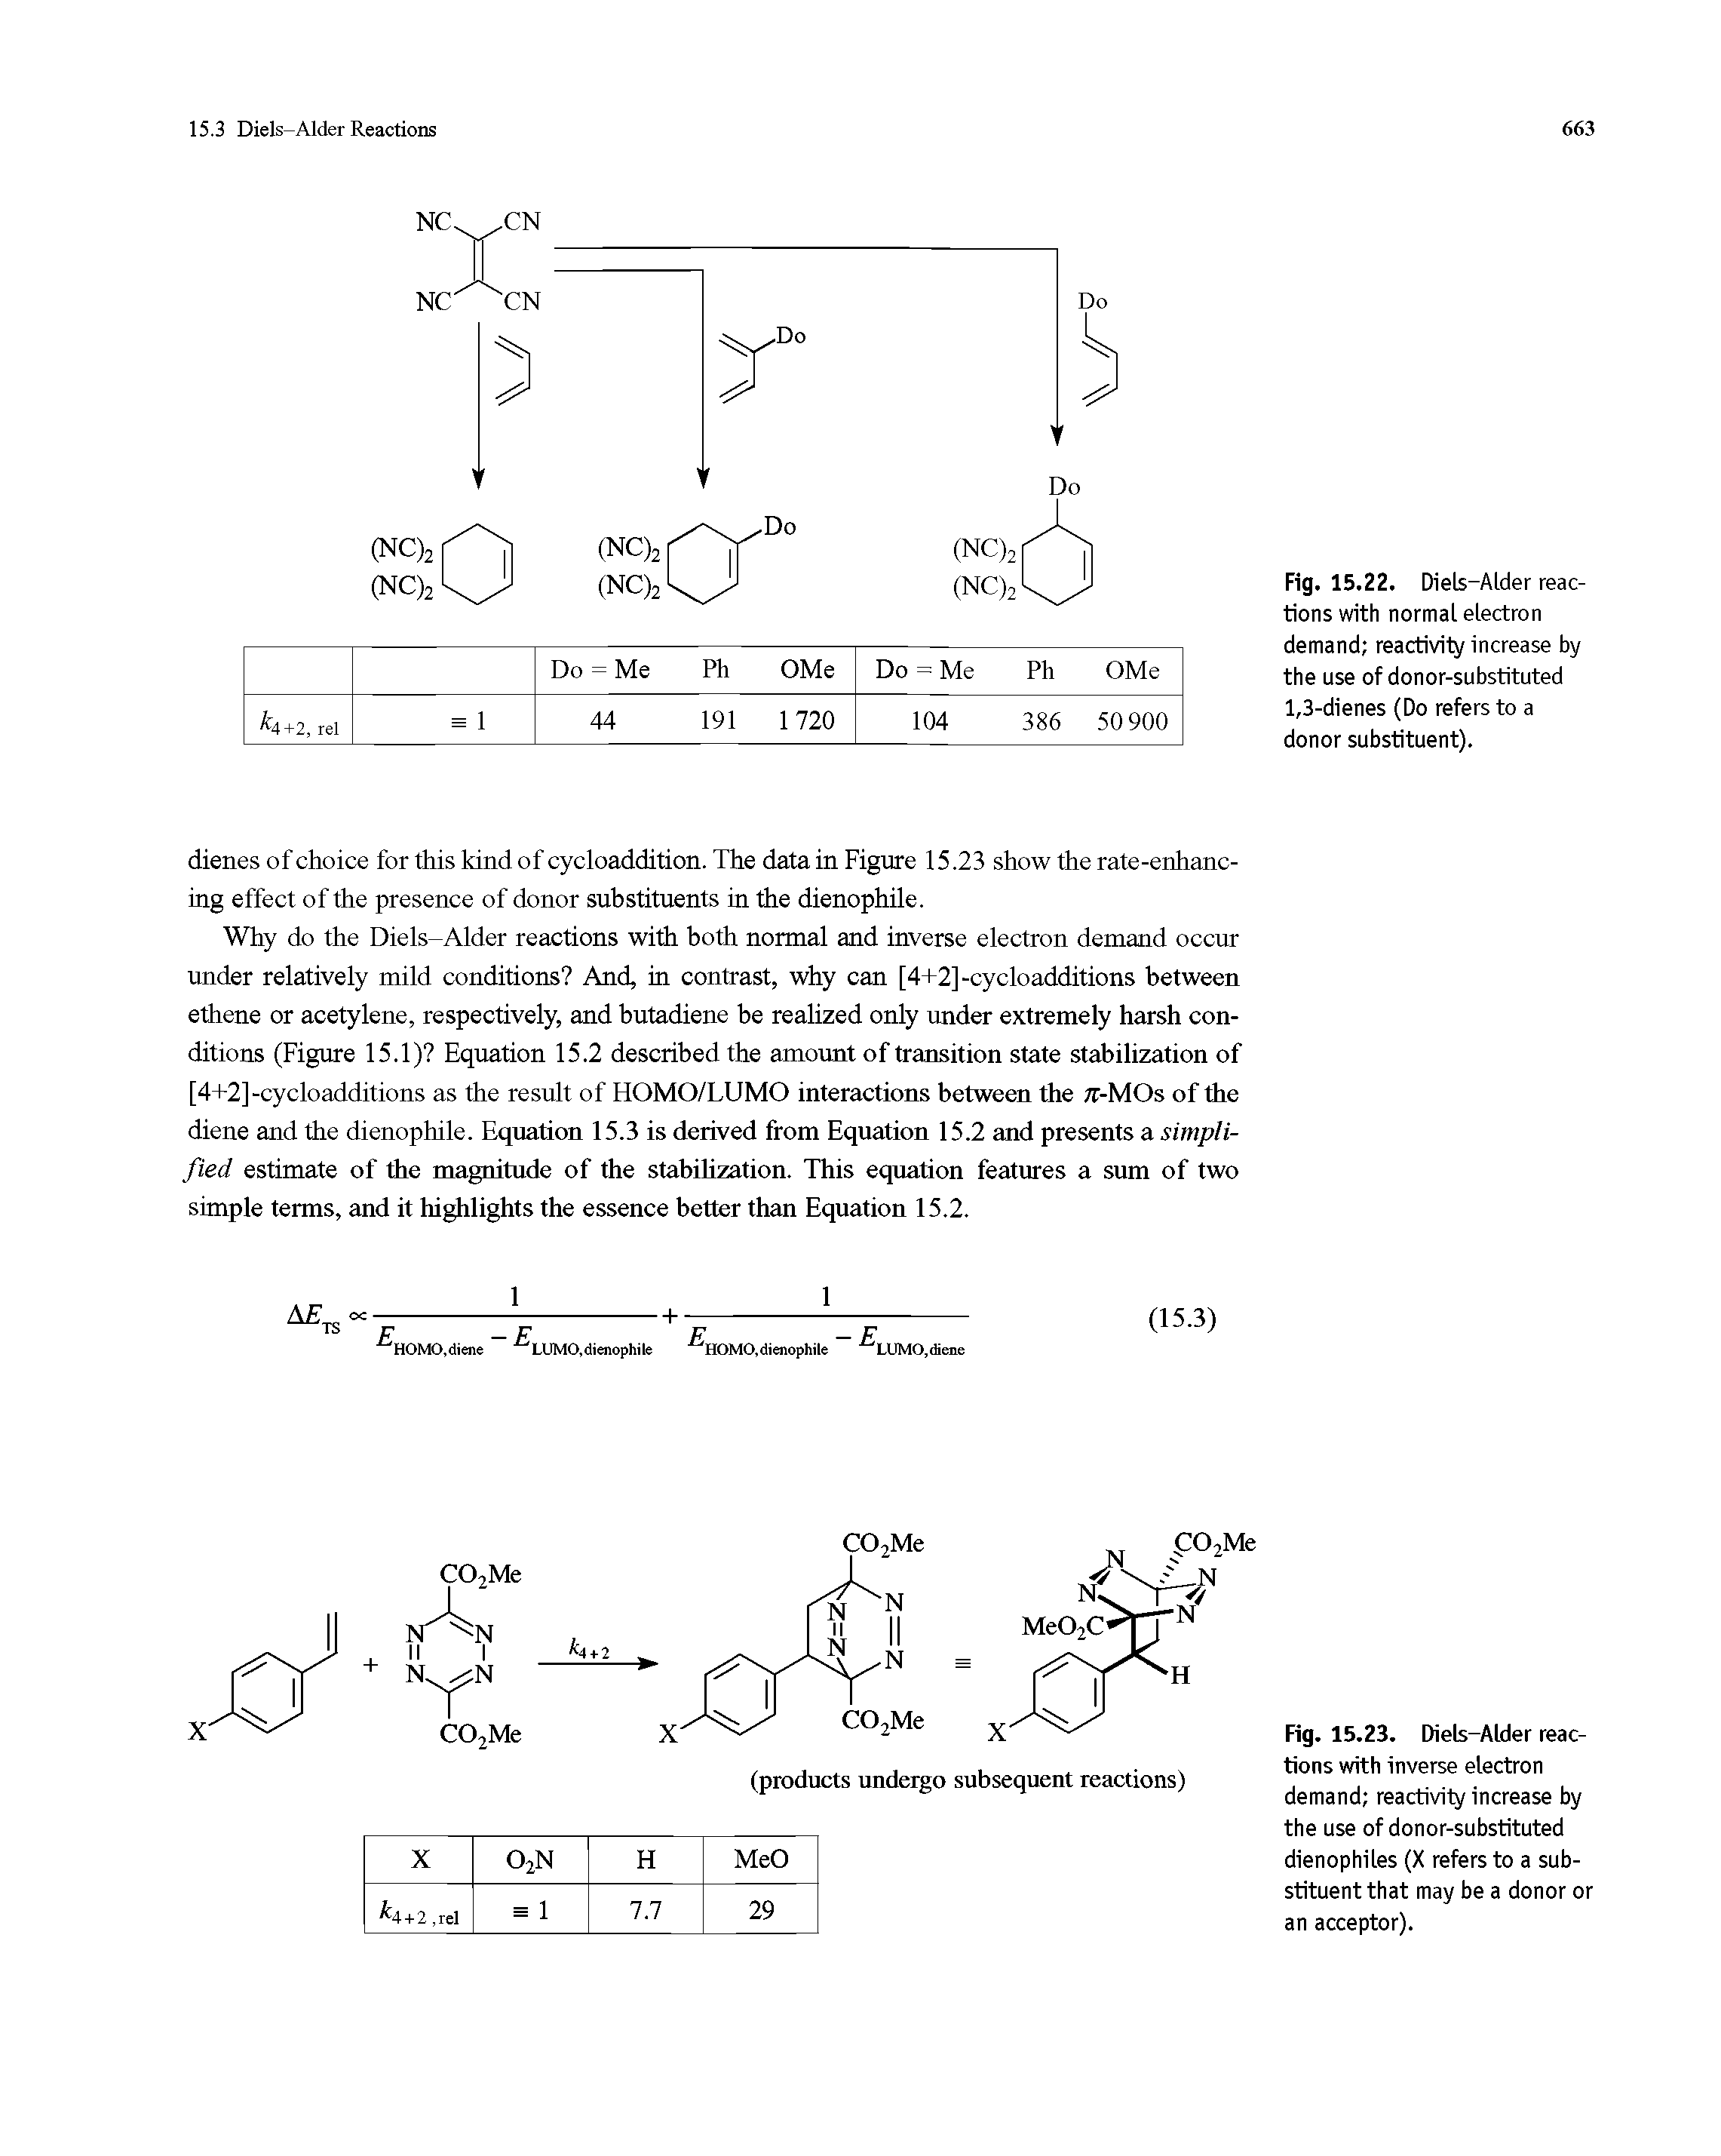 Fig. 15.22. Diels-Alder reactions with normal electron demand reactivity increase by the use of donor-substituted 1,3-dienes (Do refers to a donor substituent).